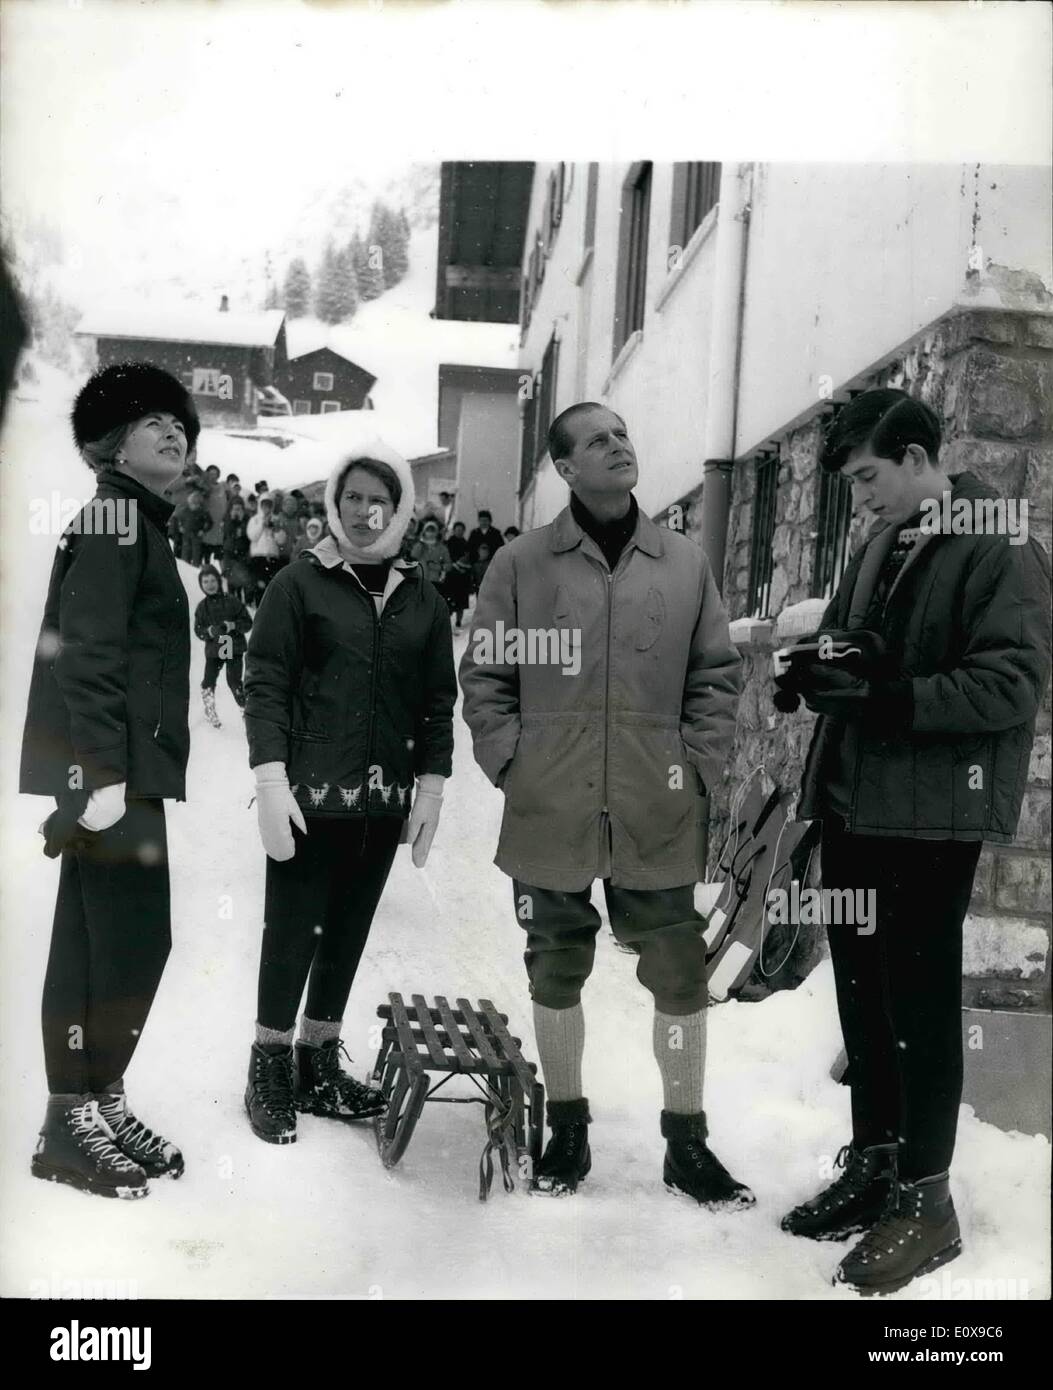 Dec. 12, 1965 - Duke And children in Lichtenstein. The duke of Edinburgh, princess Anne and prince Charles, who are on holiday in Vaduz castle as guests of princes Franz Josef II and princess Gina of liechestein, today drove to the winter resort of Malbun for their first outing in Alpine snow this season. photo shows The duke of Edinburgh, Prince Charles , princess anne and princess Gina, Pictured today at Malbun, Liechestain. Stock Photo